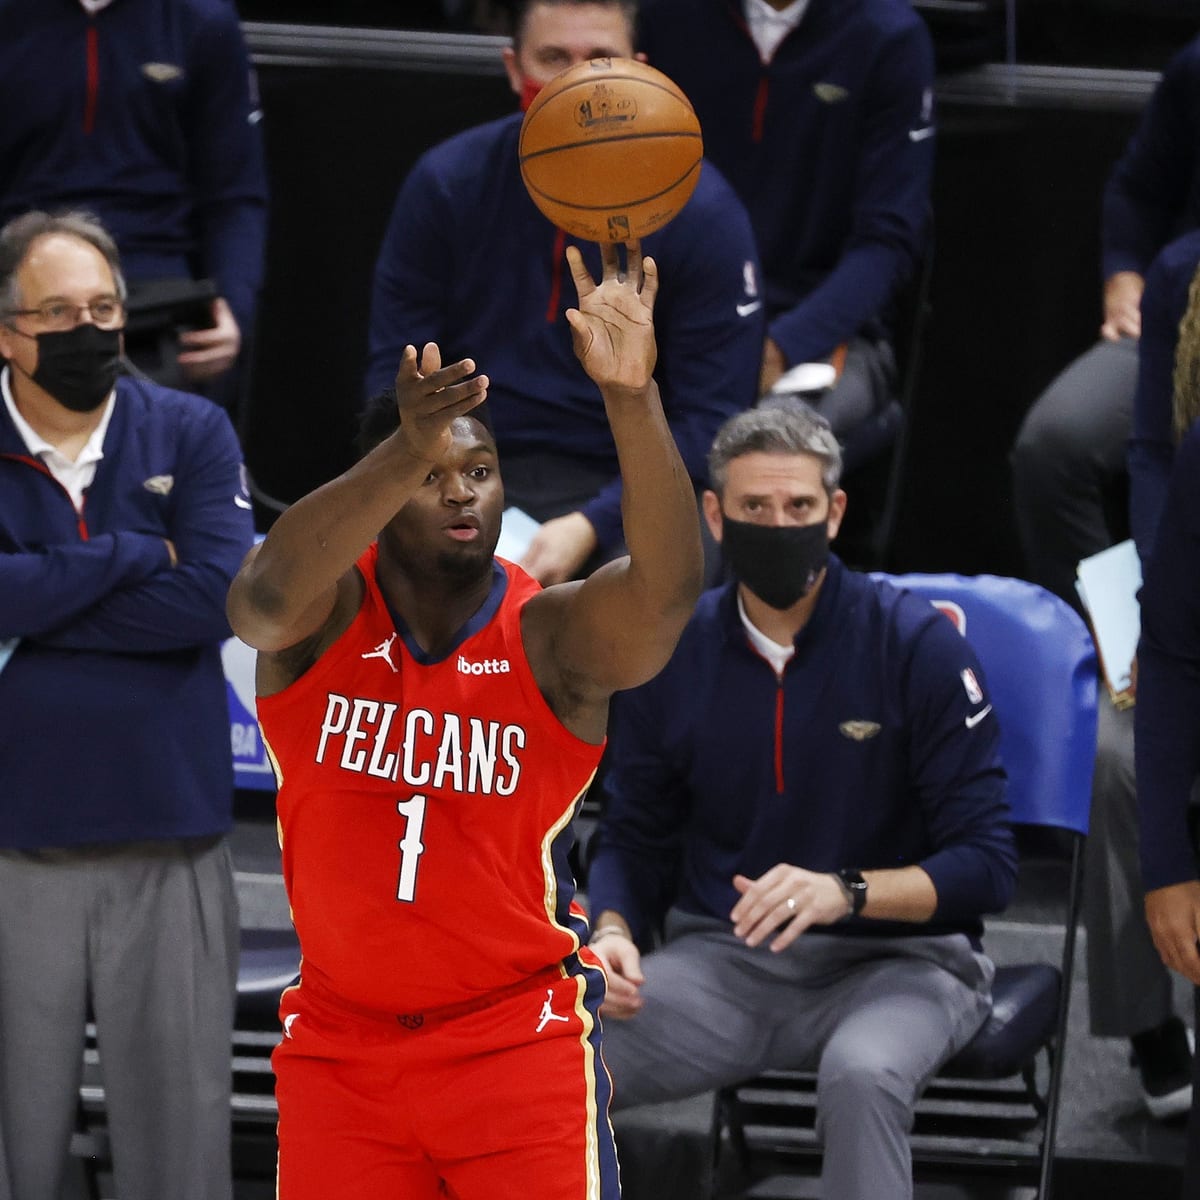 Pelicans need more from Zion Williamson than dunks - The Washington Post